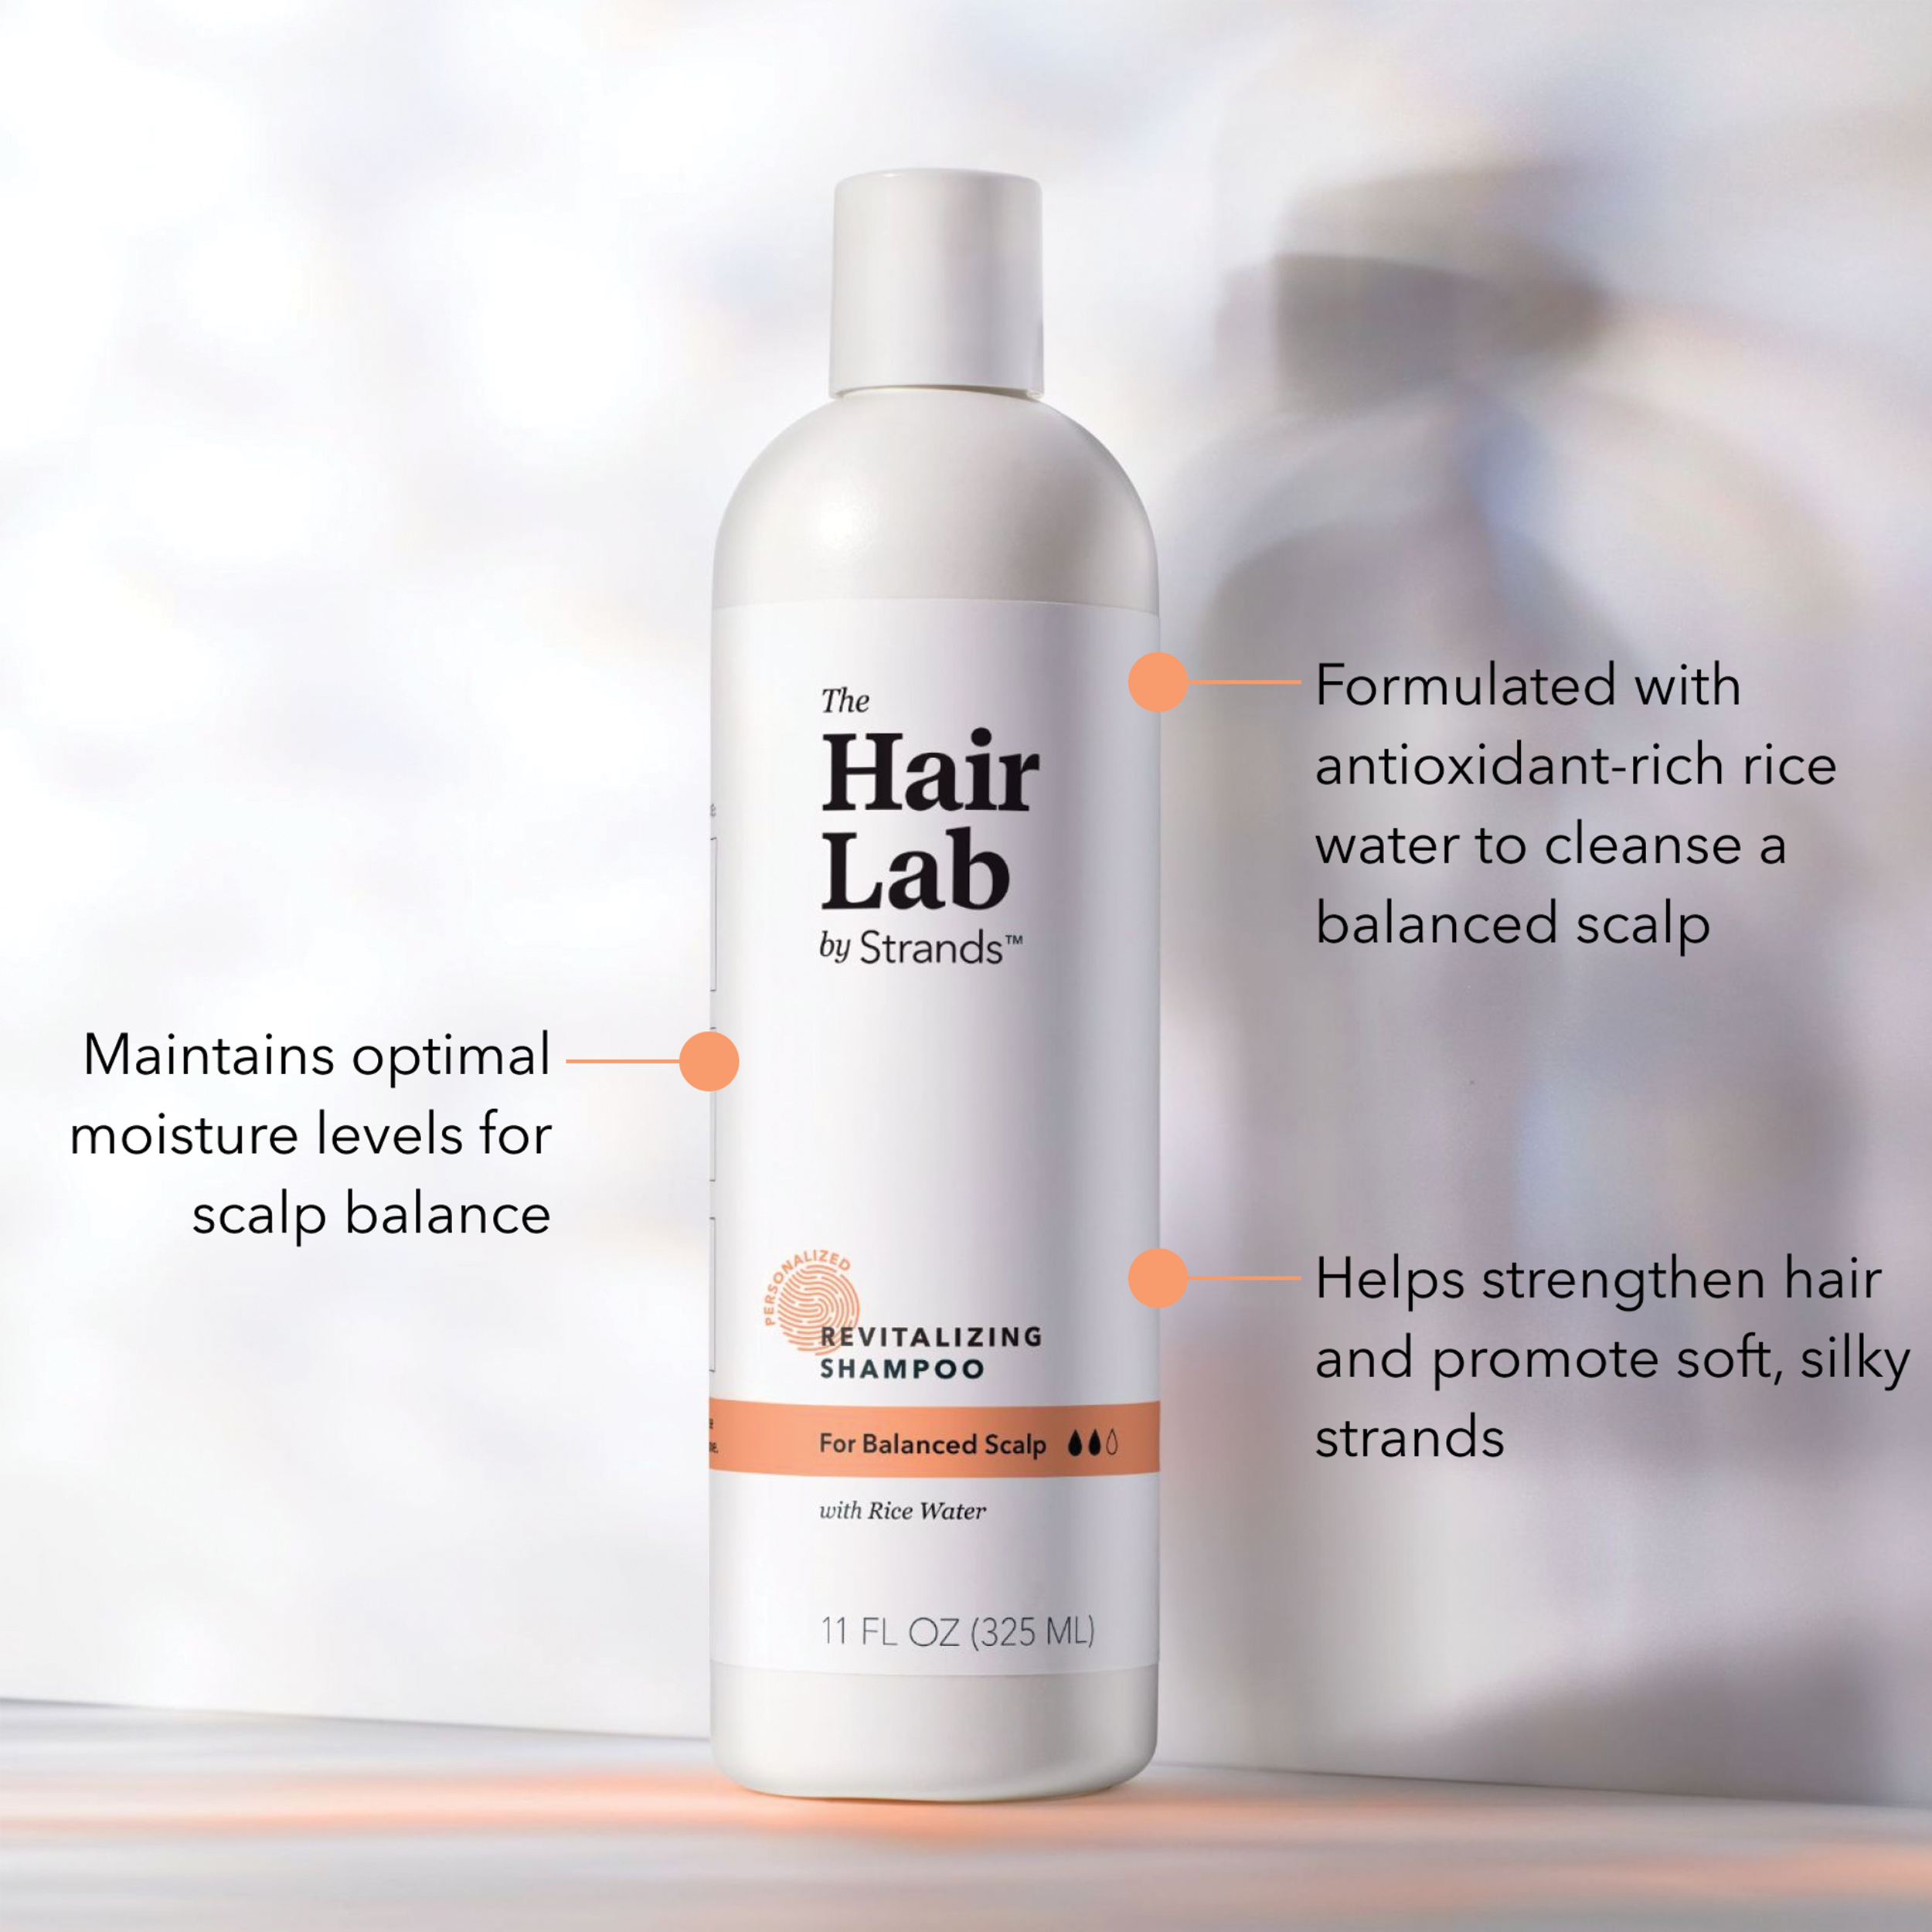 The Hair Lab Revitalizing Shampoo with Rice Water for Balanced Scalp, Sulfate & Paraben Free, 11 oz. - image 4 of 9